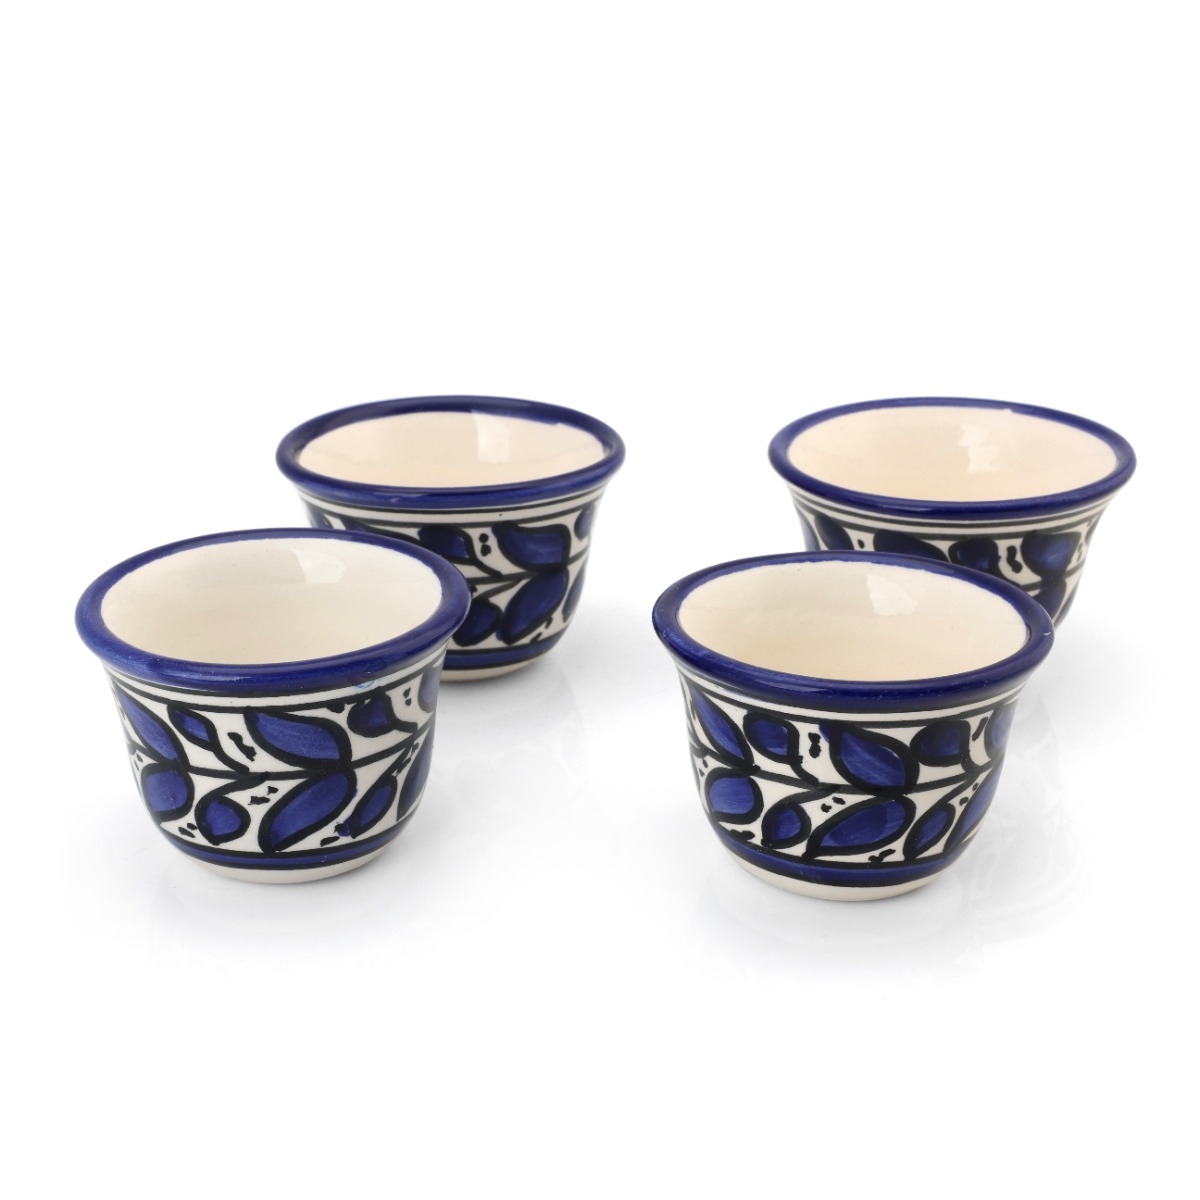 Armenian Ceramic Classic Blue and White Turkish Coffee Cup Set - 1